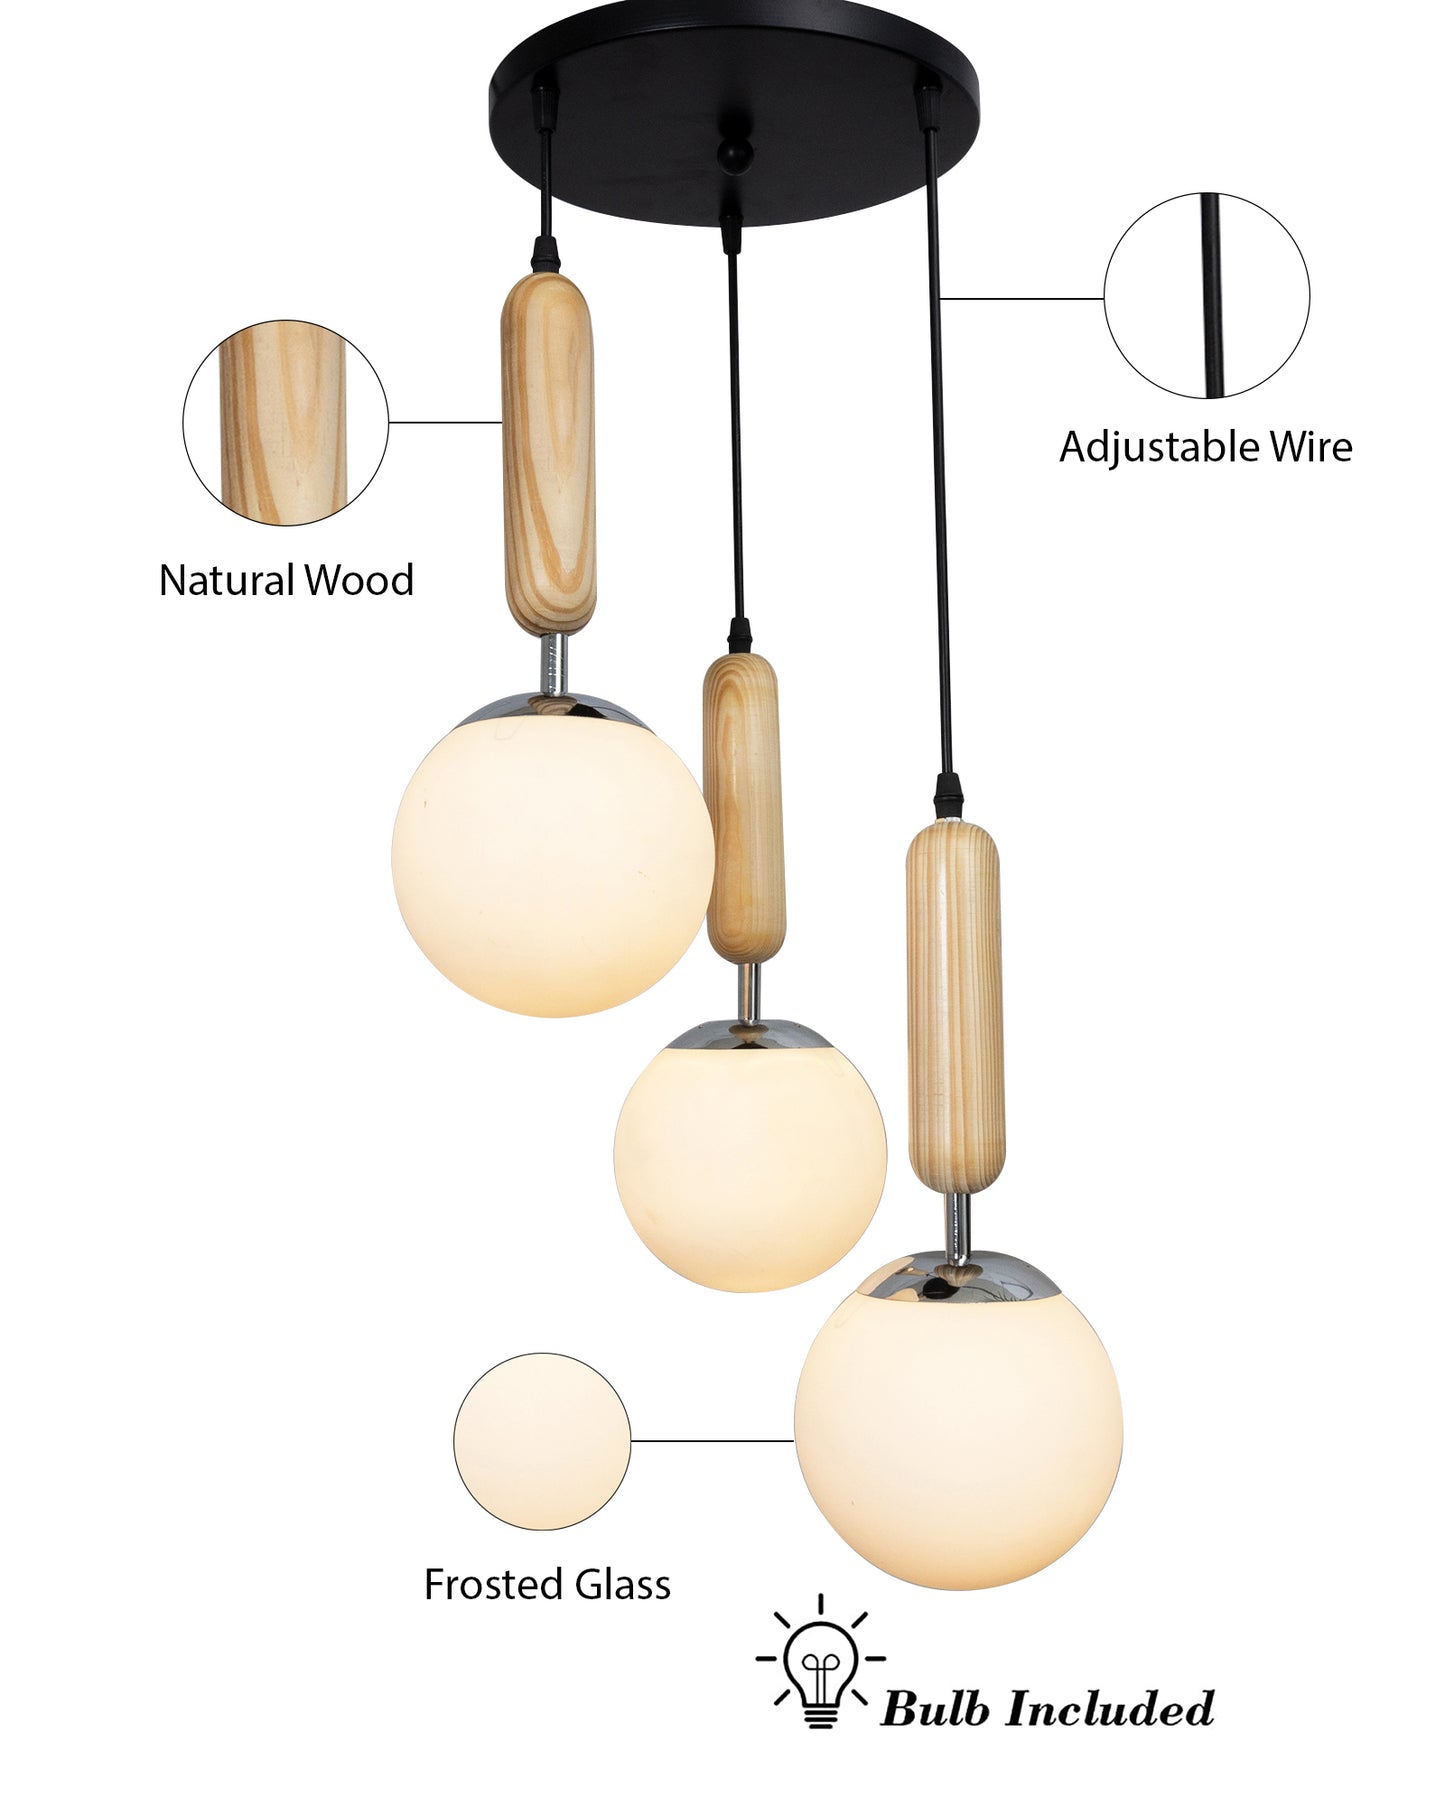 Wooden Chandelier Round Plate hanging light with chrome finish, frosted glass globes